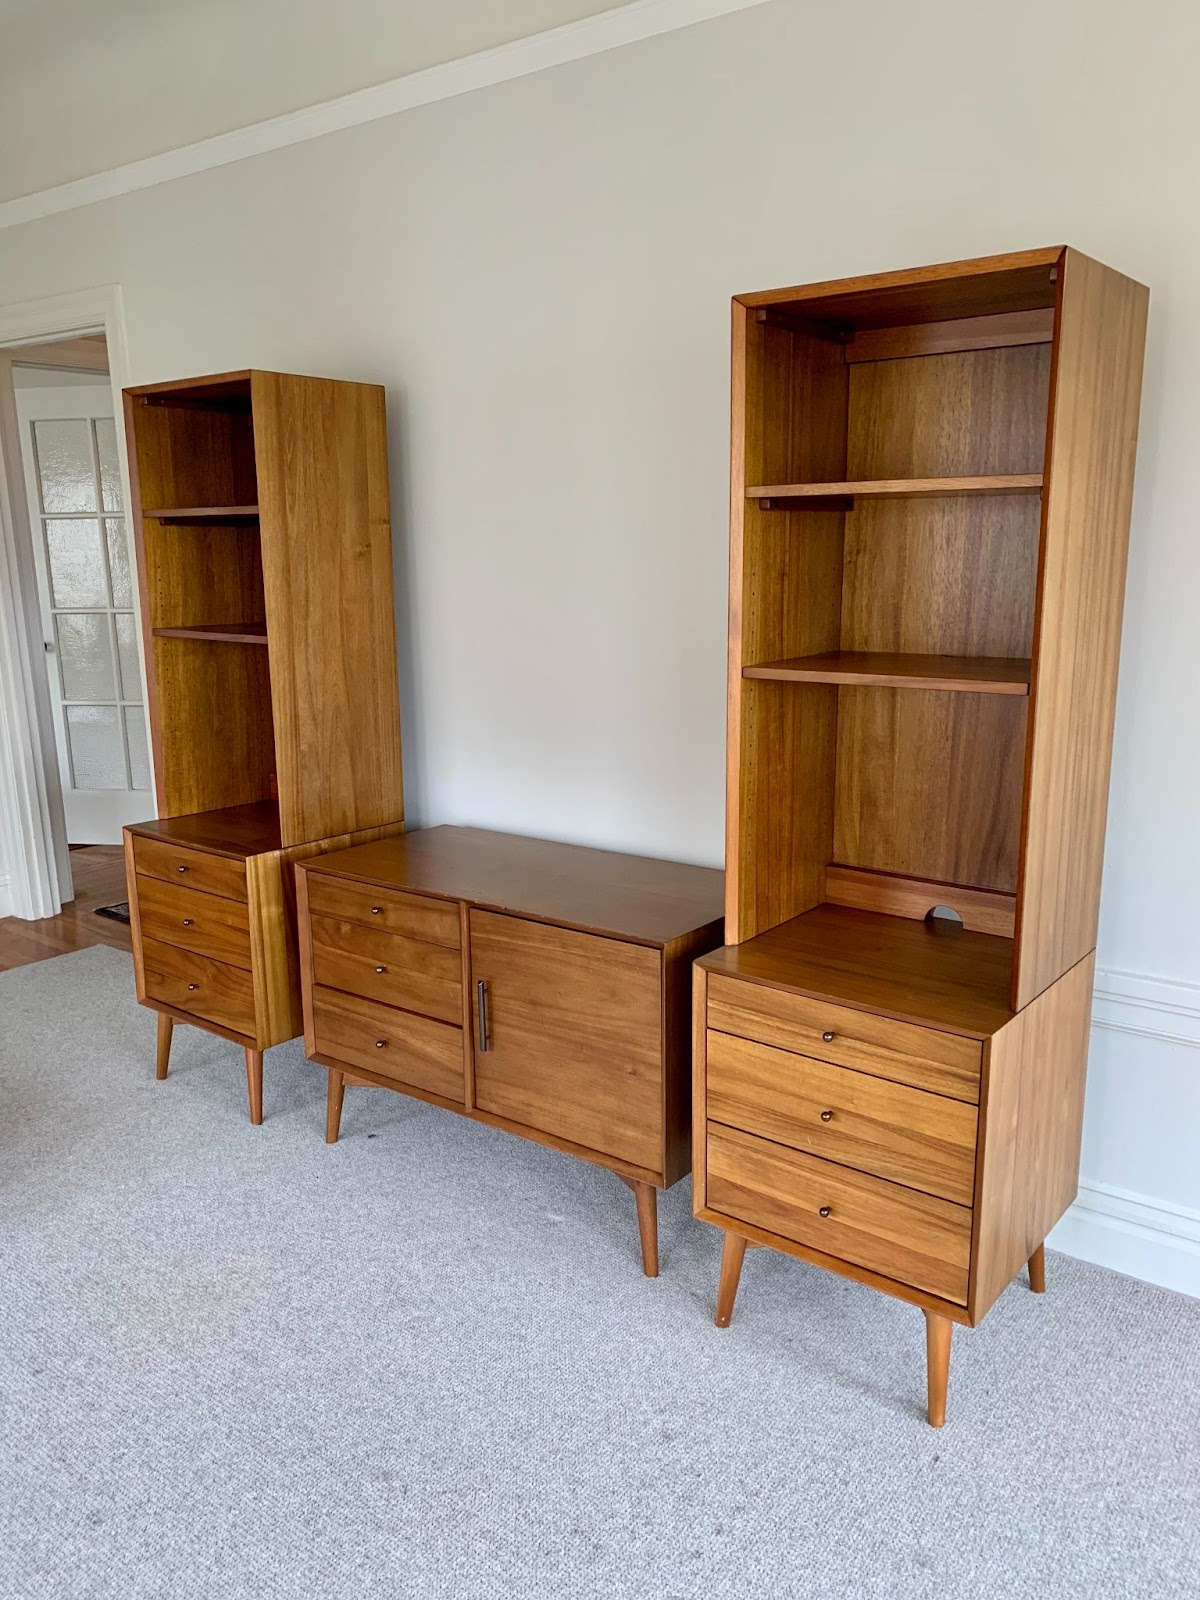 Claire McCann, 27, Lugg delivered this mid-century modern West Elm media center up three flights of stairs and back down when someone bought it. I purchased it for $650 and sold it for $1700.